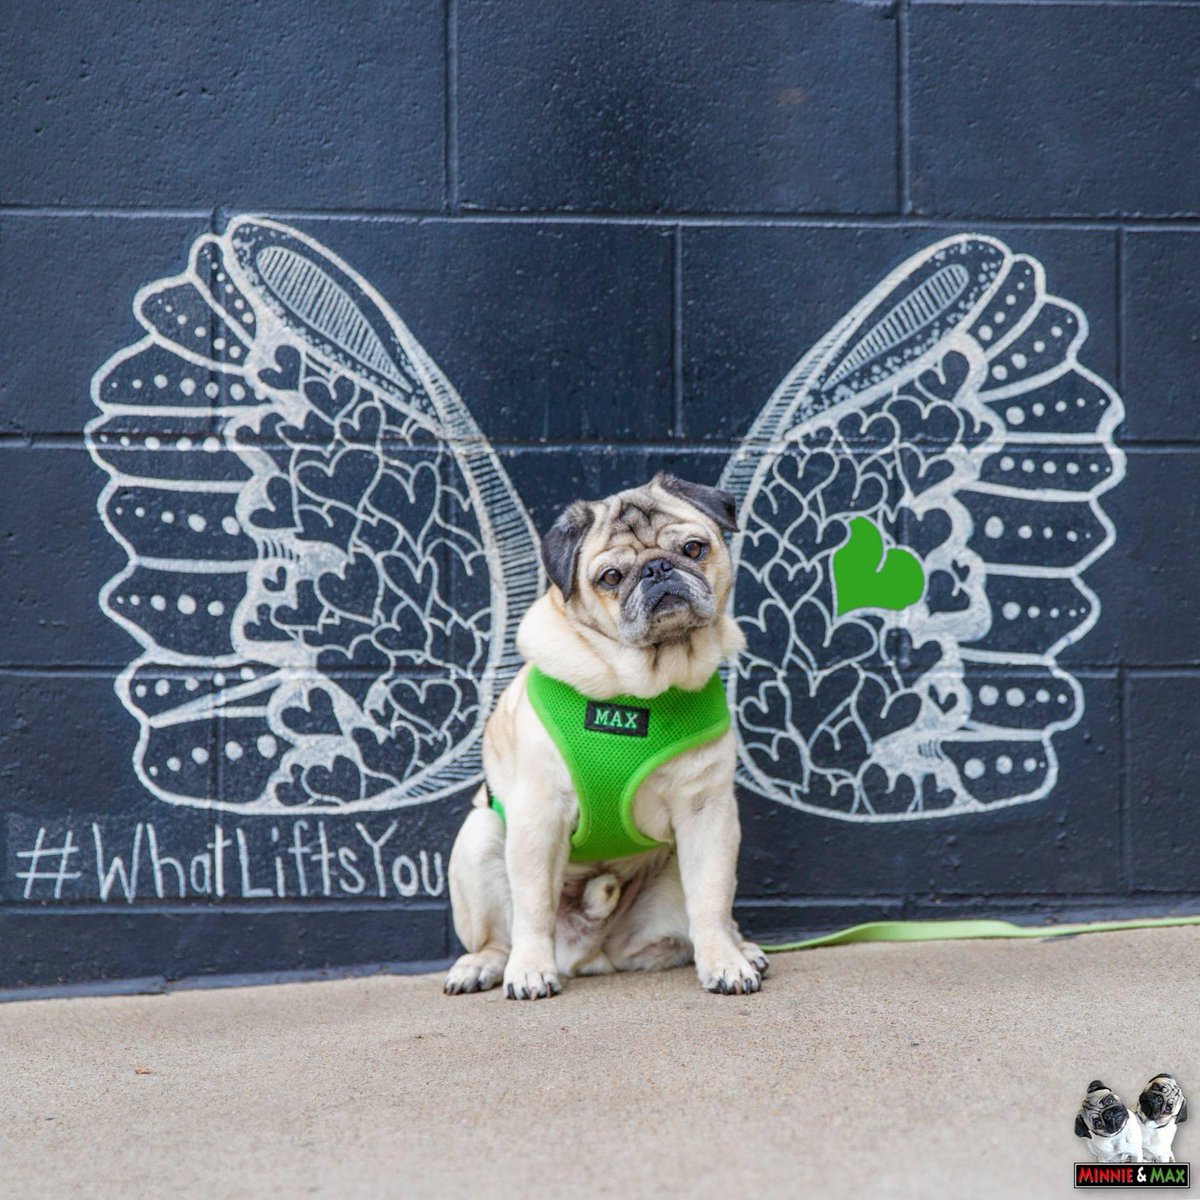 It's as if they were made especially for you. 🌈💚
#MaxMonday #WhatLiftsYou #pug #angel